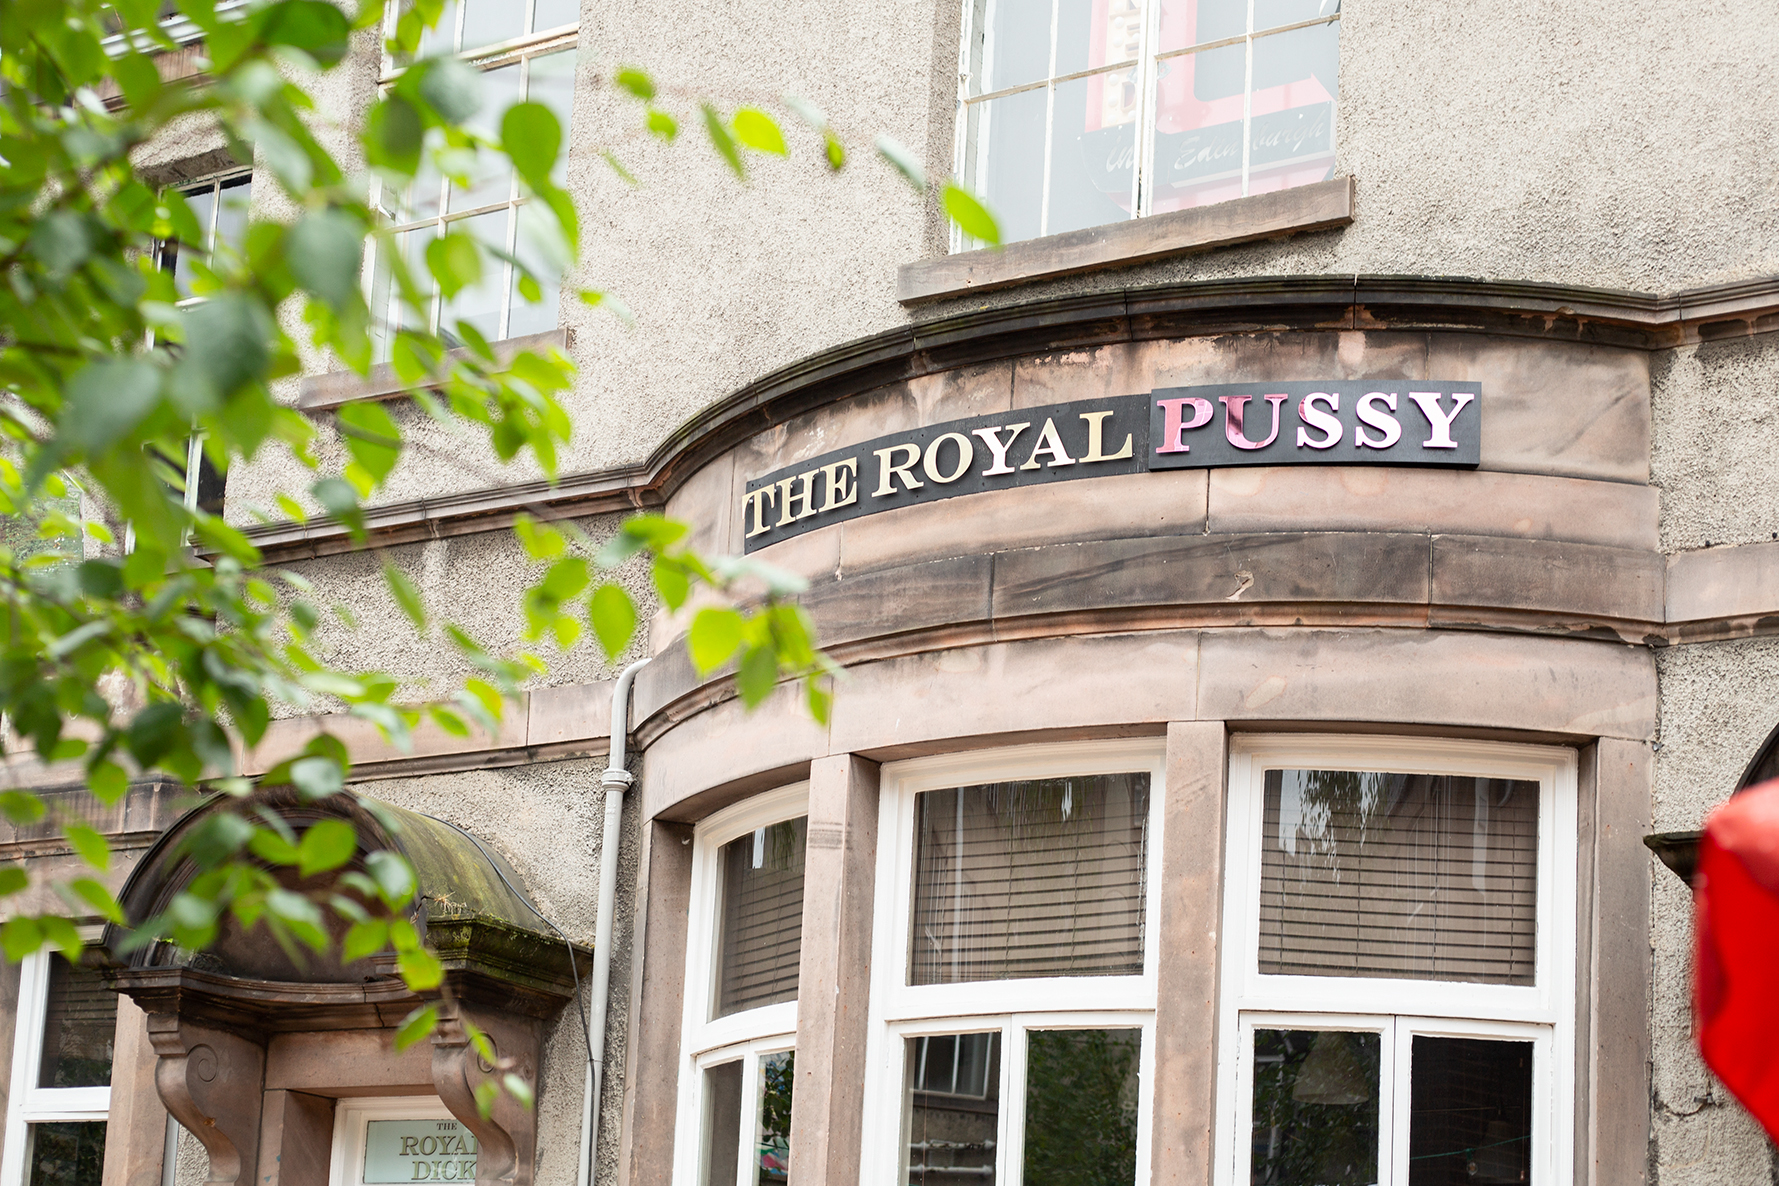 'The Royal Pussy' - curatorial intervention